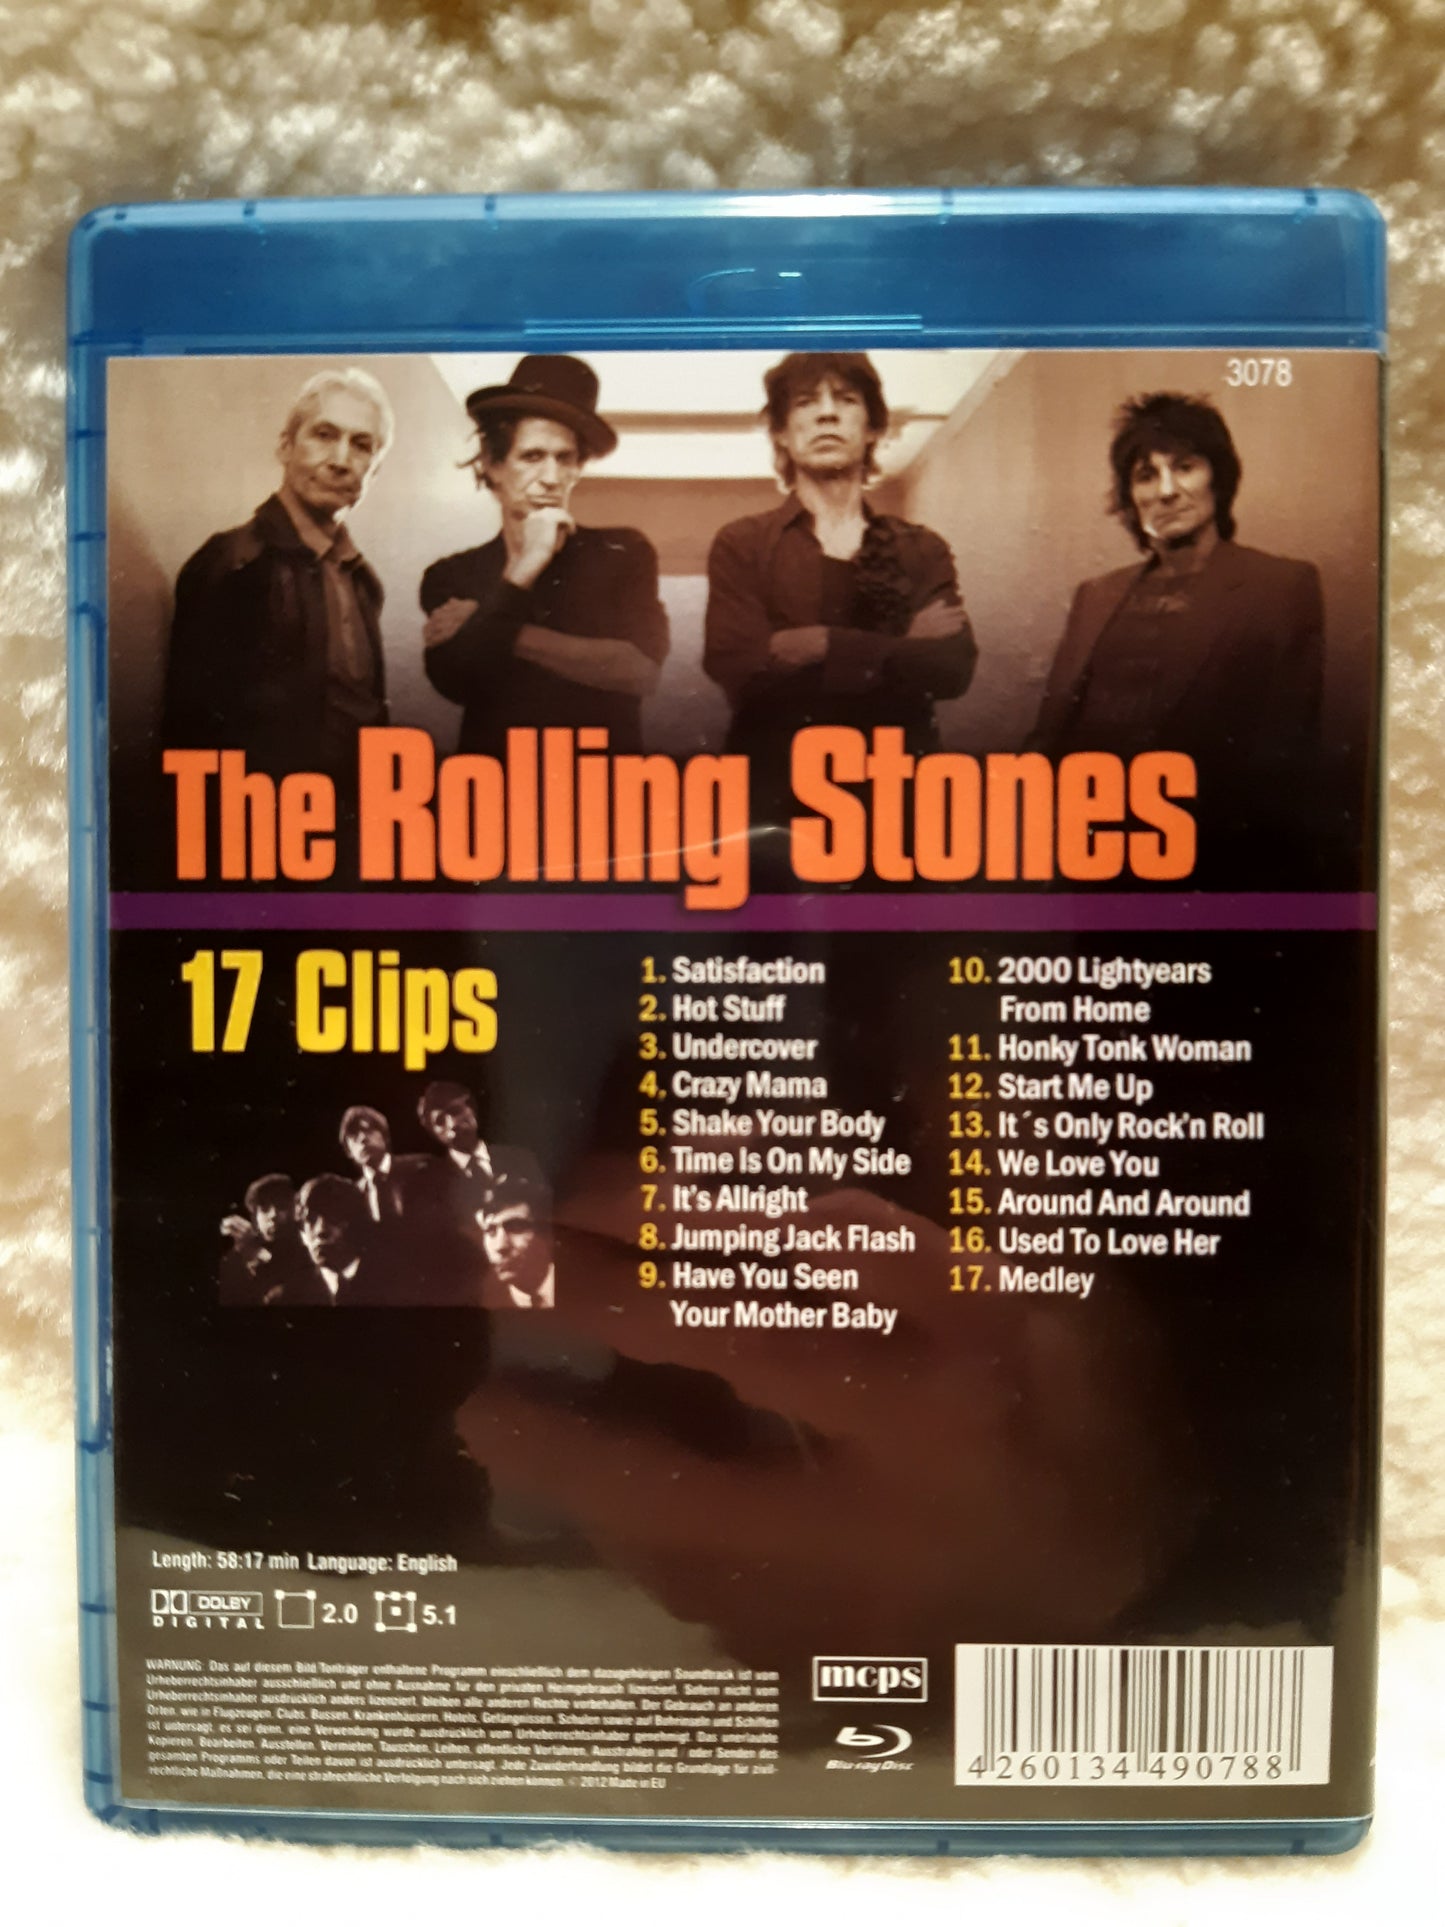 the rolling stones - 17 clips - blu-ray